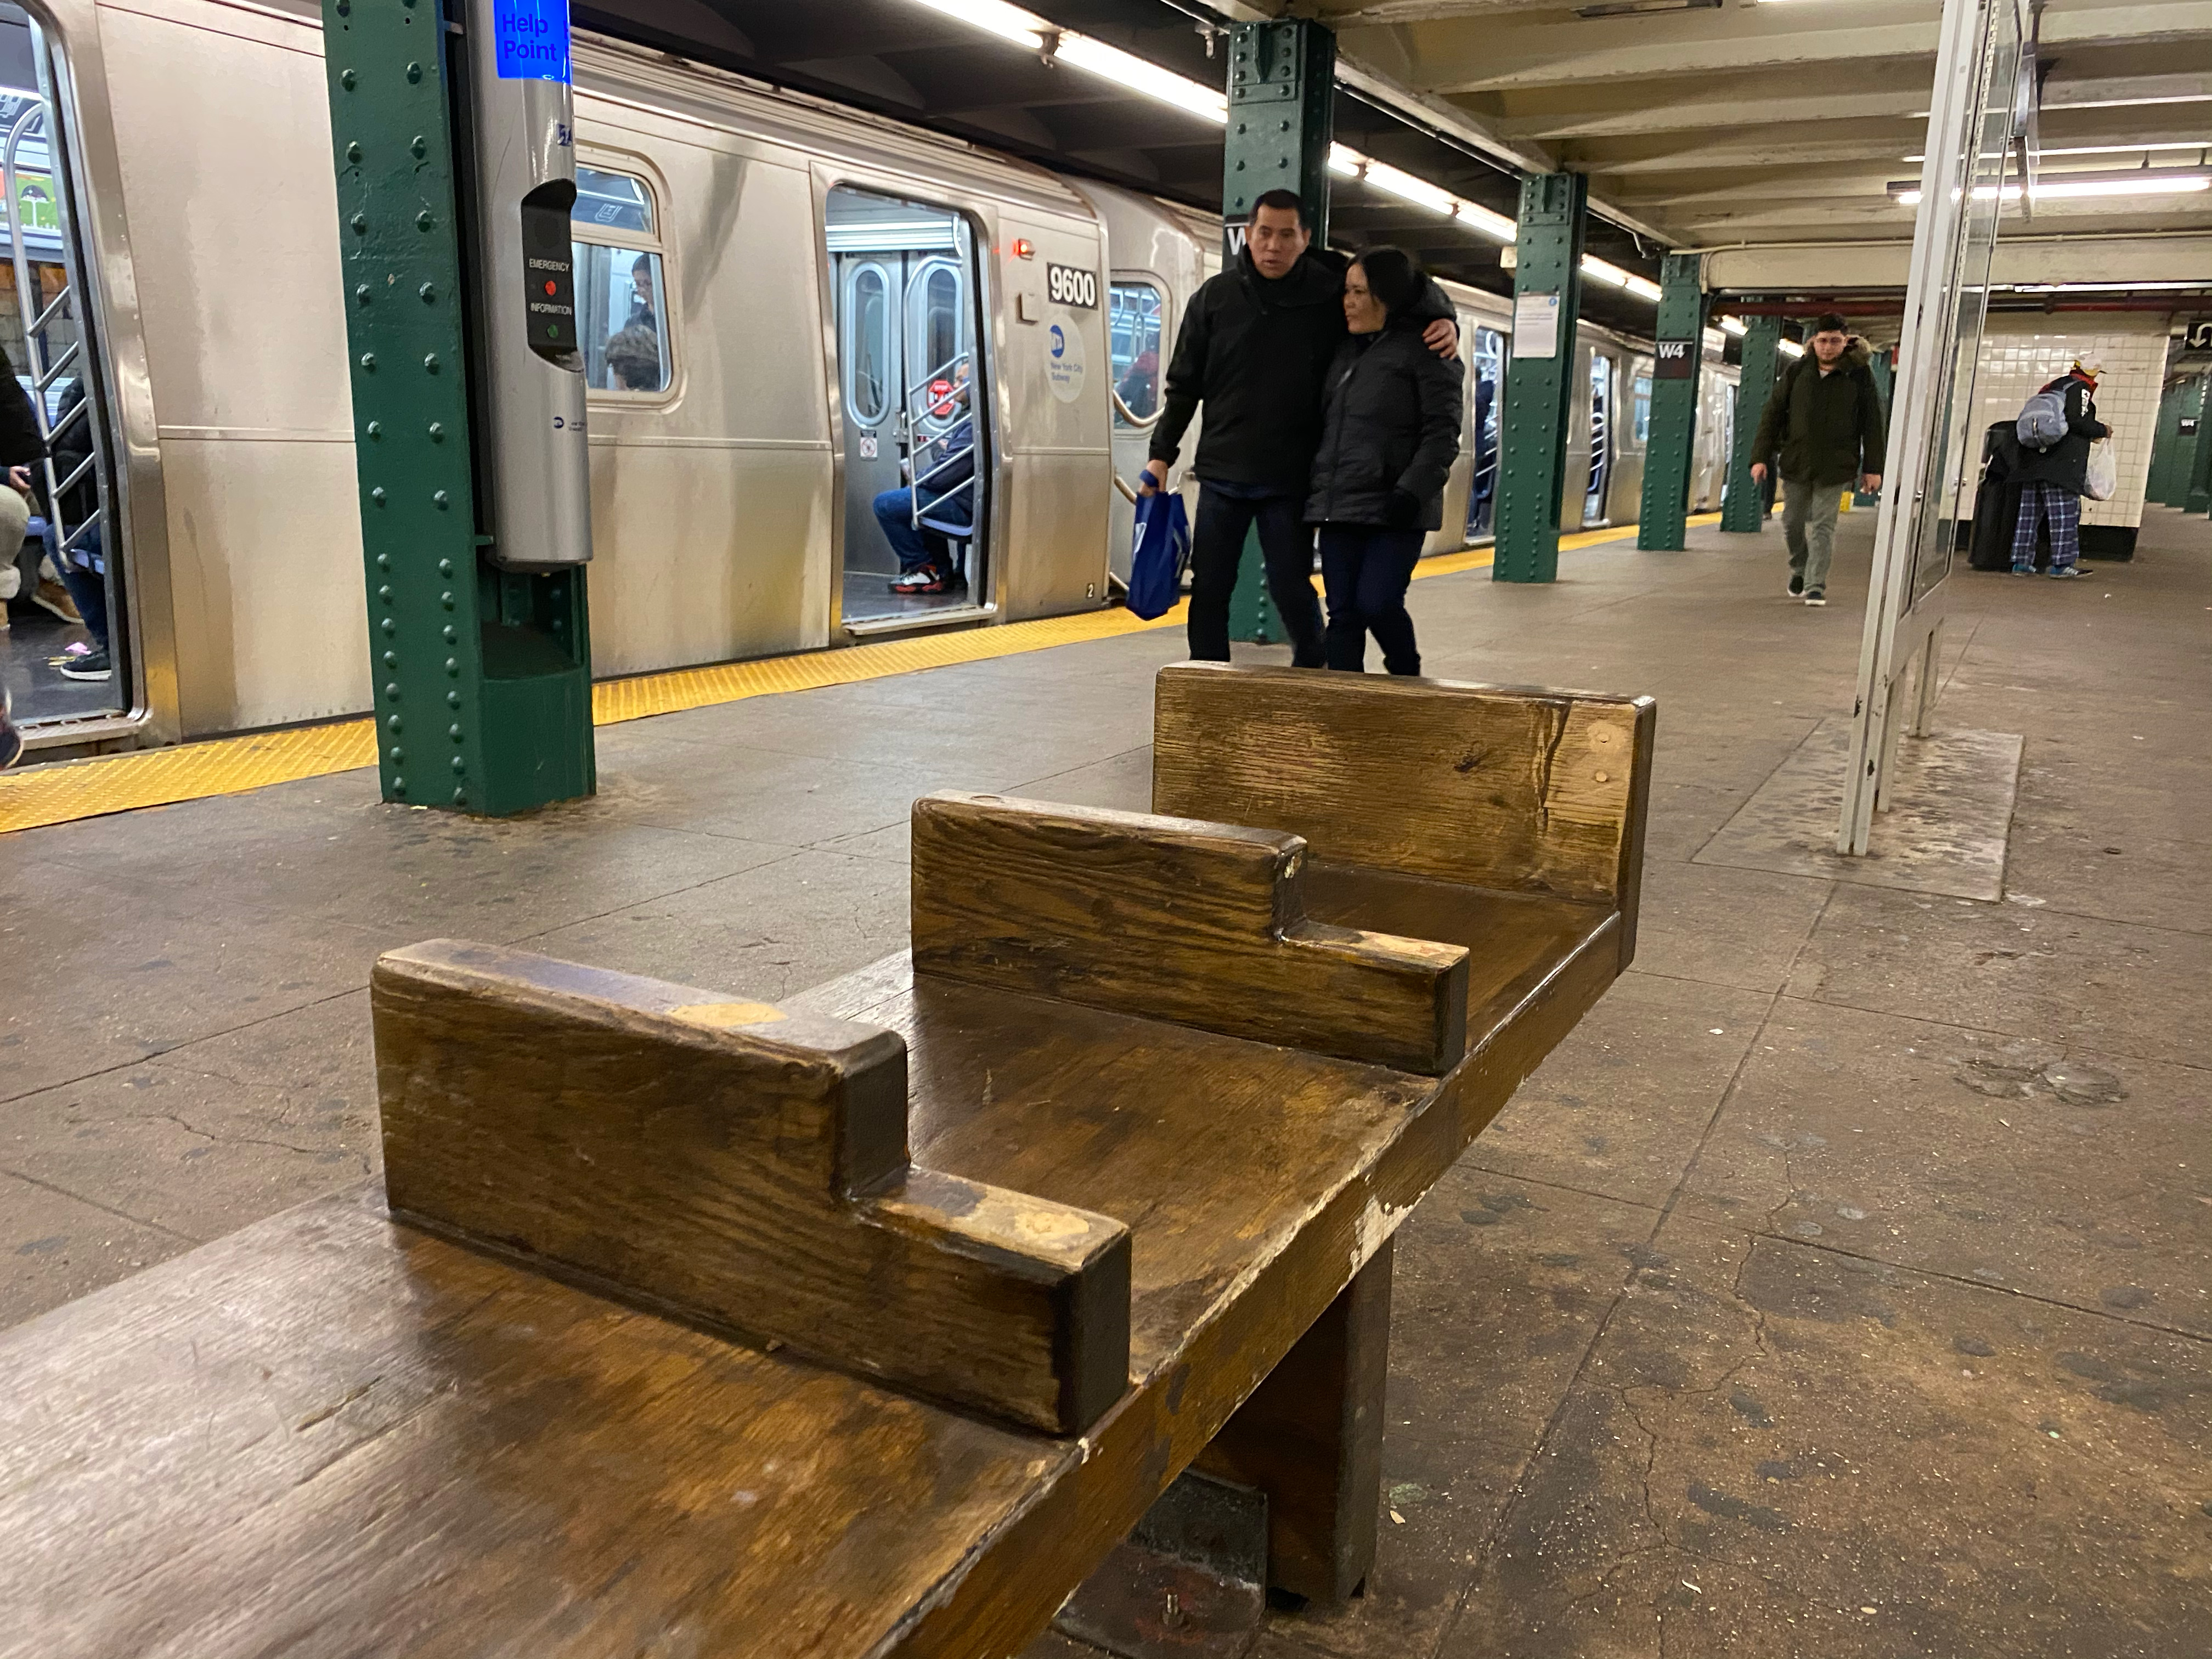 These subway benches at E 161 Street near Yankee Stadium :  r/HostileArchitecture